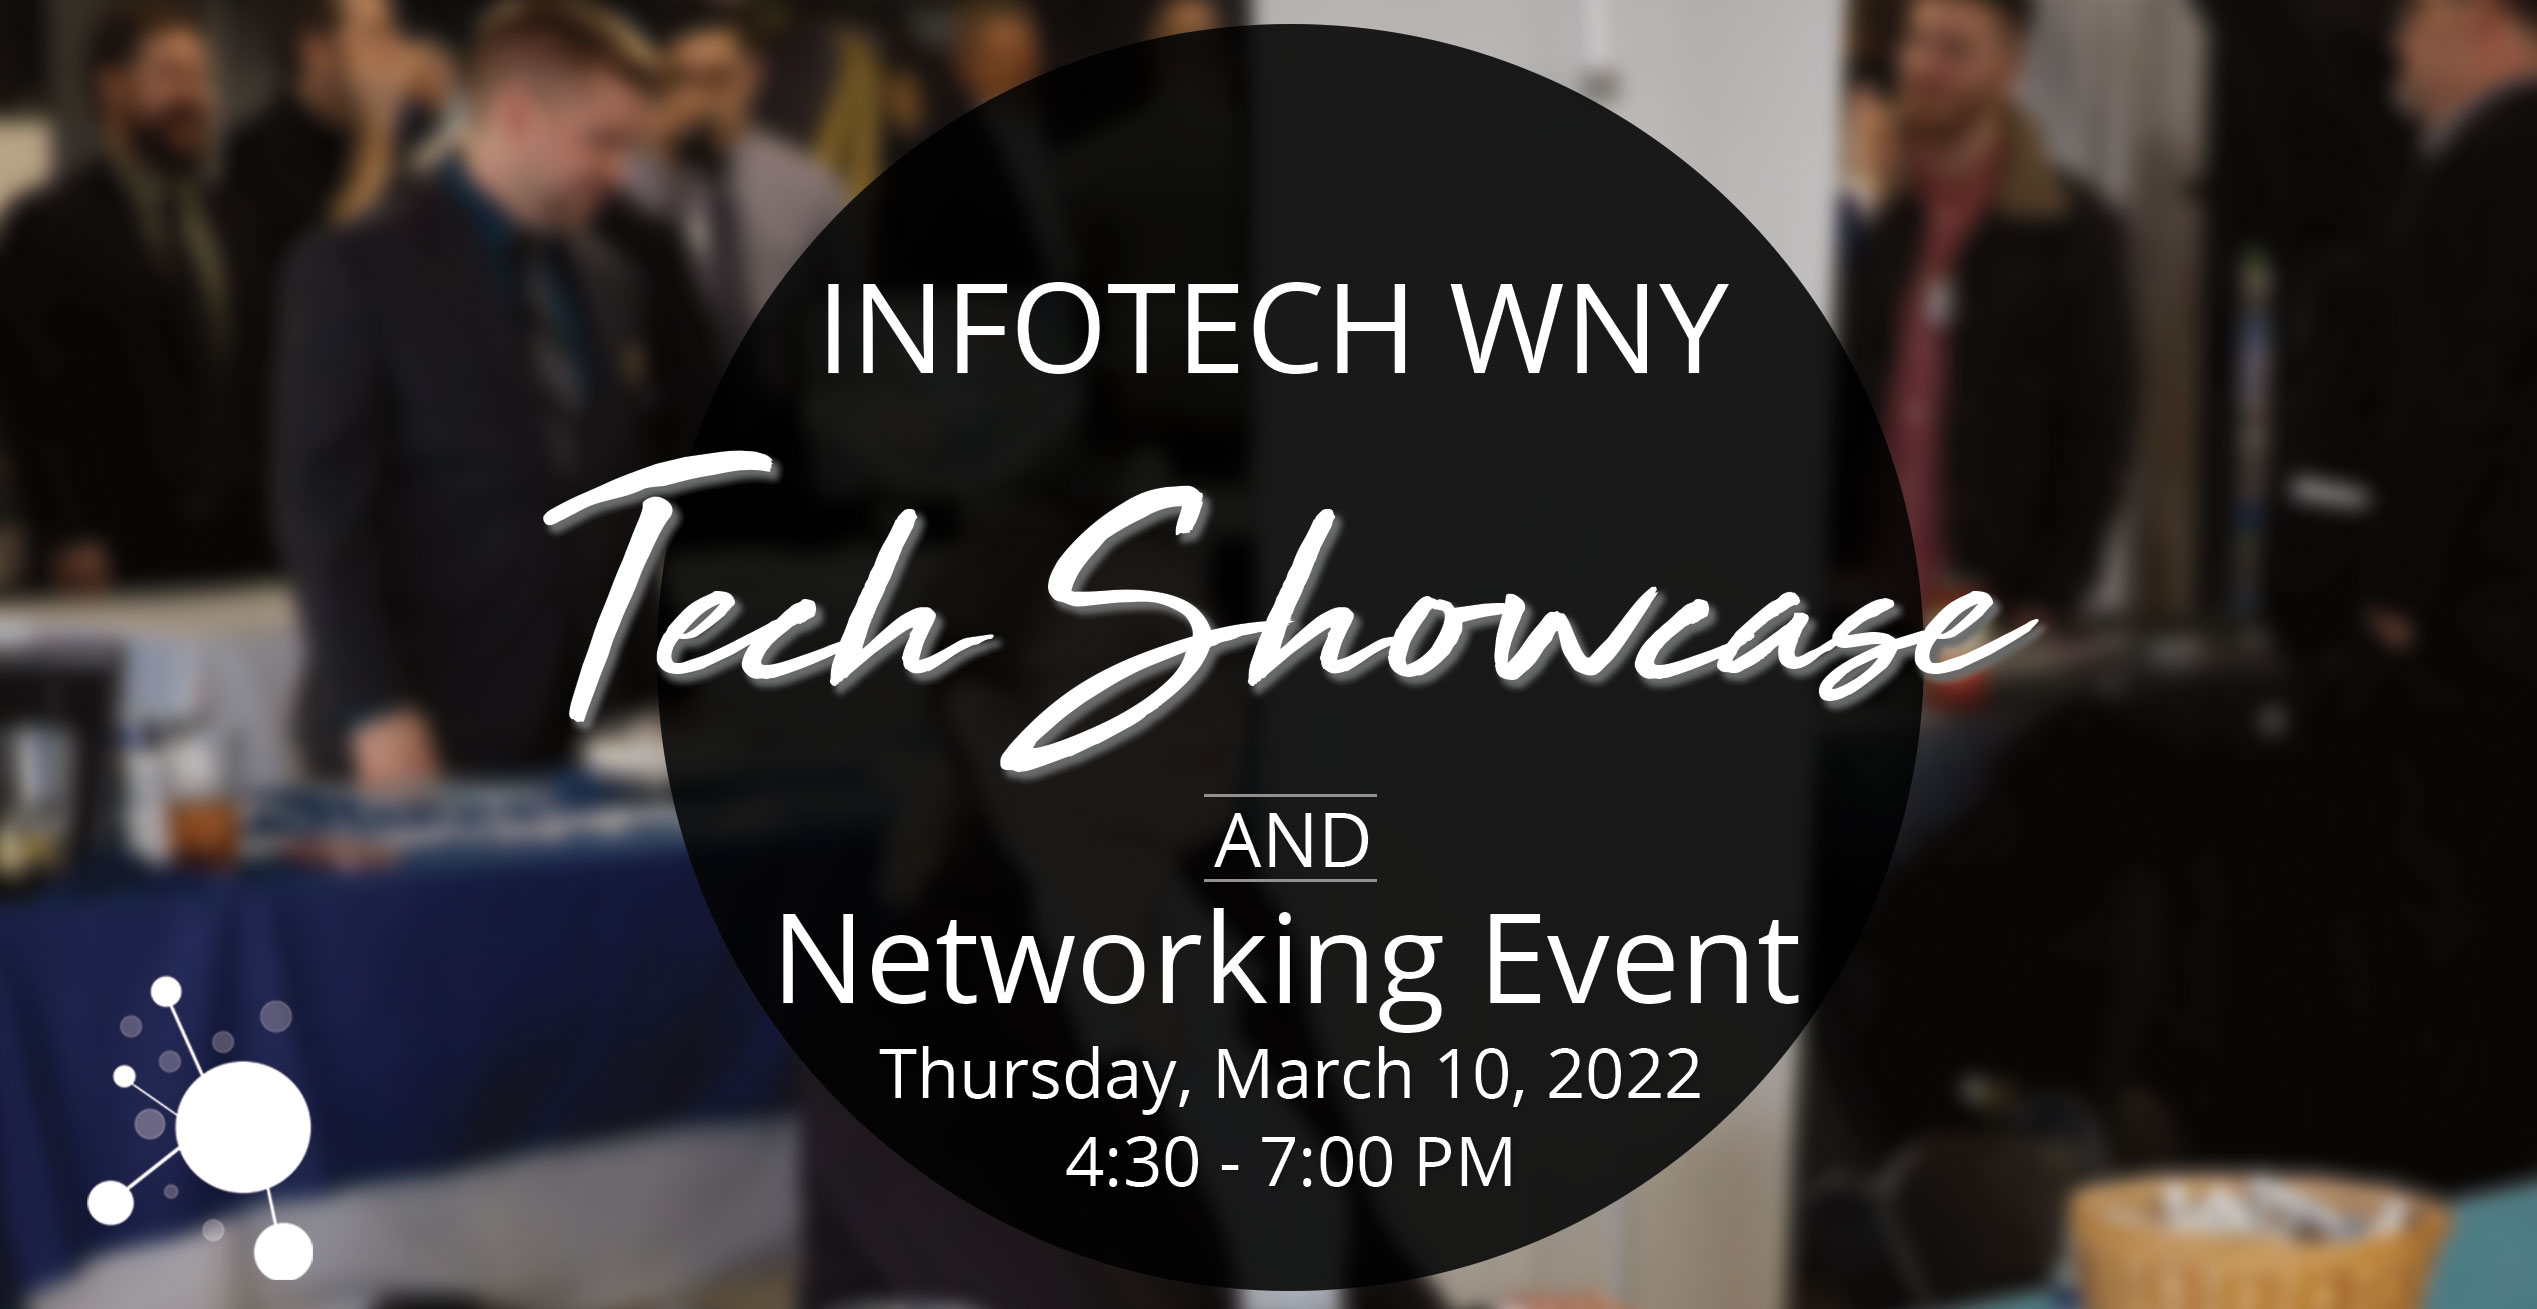 Tech Showcase Networking Event